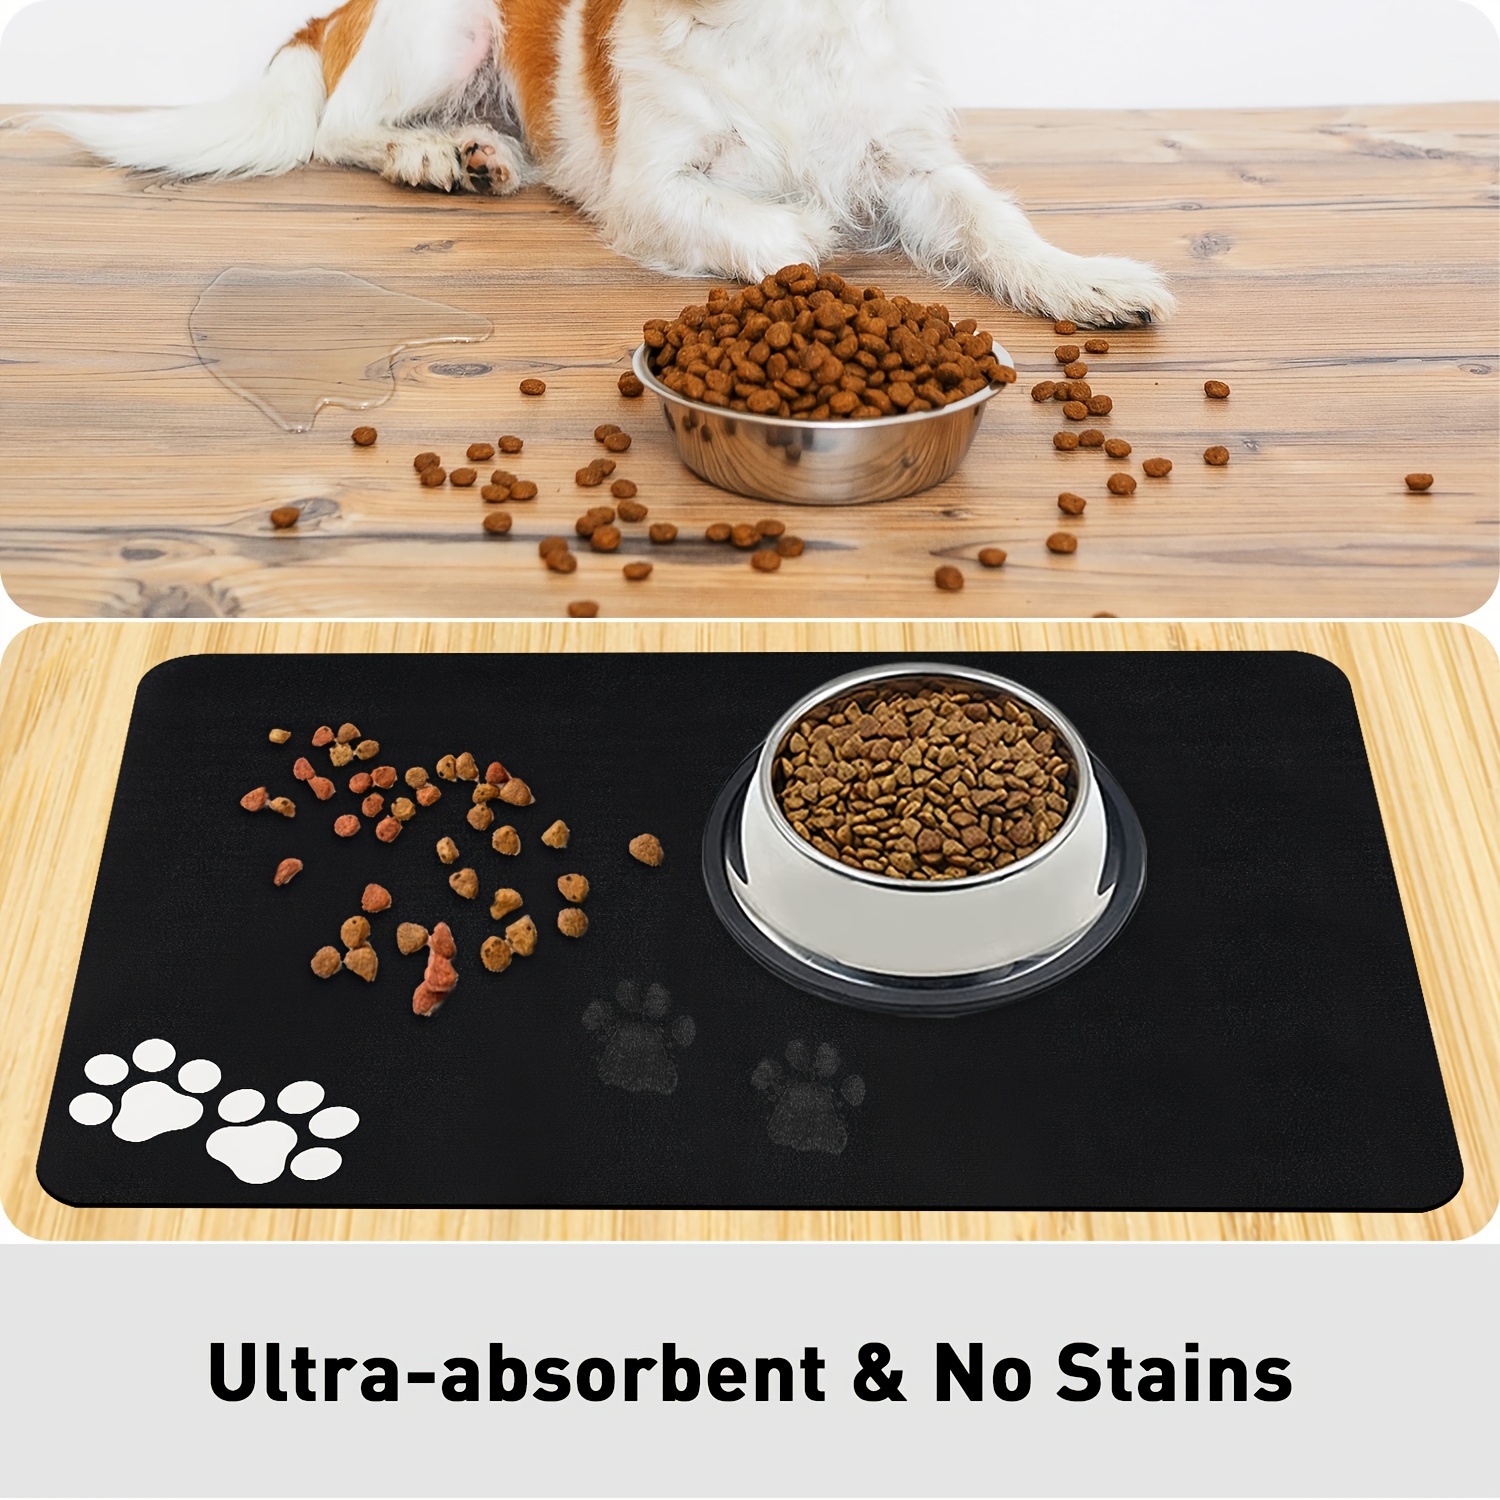  24 X 16 in Absorbent Pet Feeding Mat, Quick Dog Mat for Food  and Water Bowl, No Stains Easy Clean Dog Food Mats for Floors, Dry Dog Water  Bowl Mat for